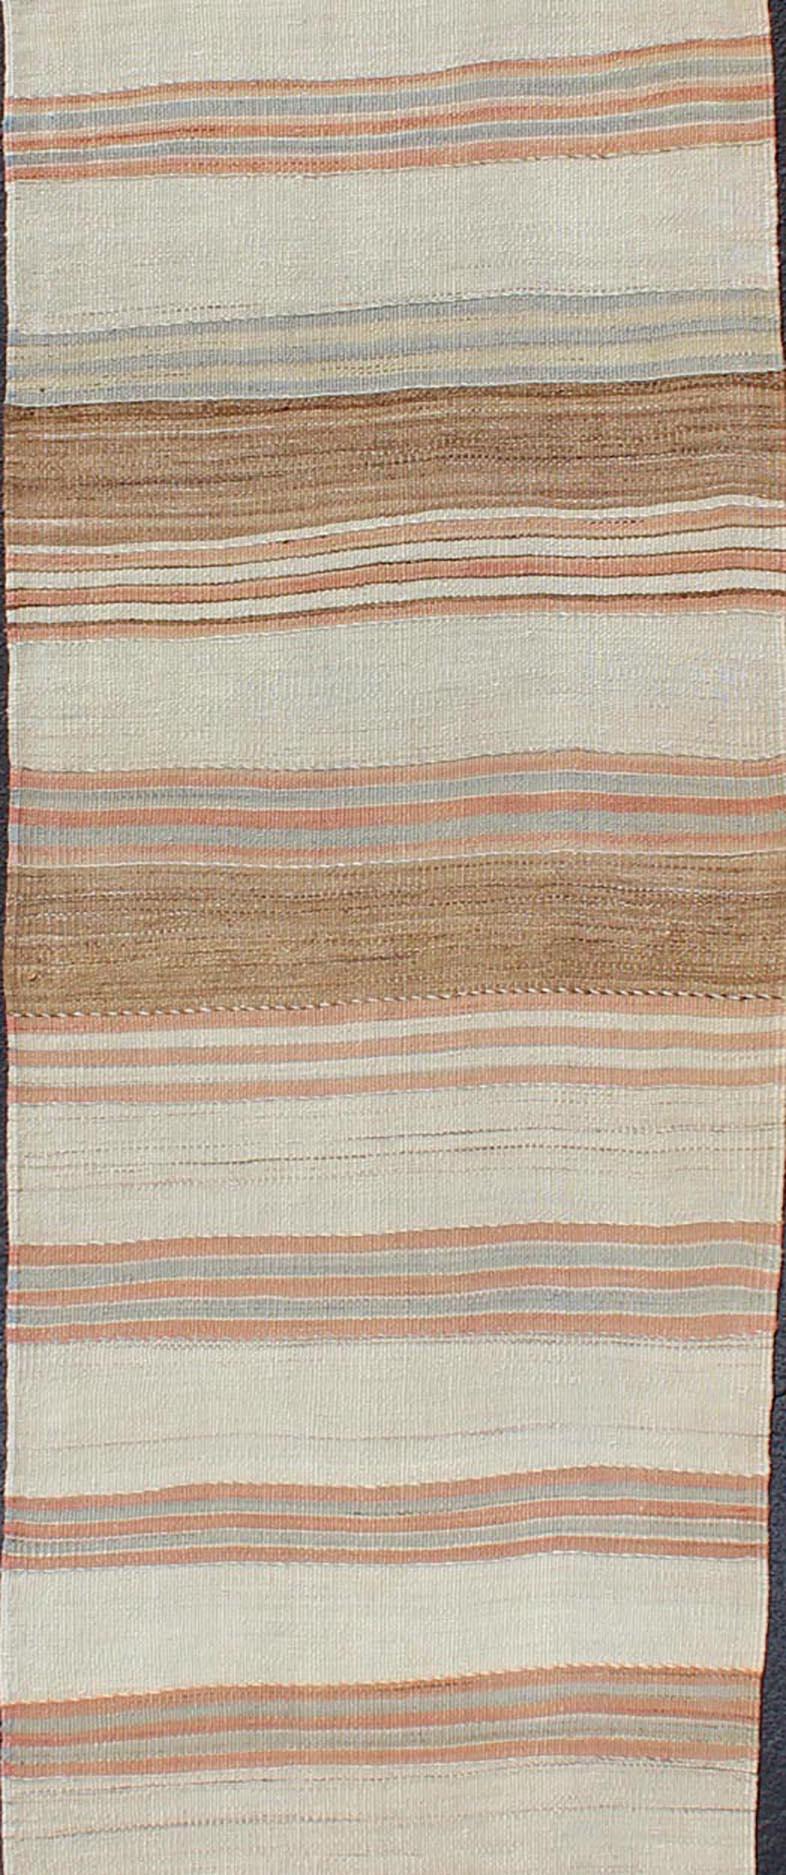 Hand-Woven Minimalist Design Vintage Long Kilim Runner with Stripes in Brown & Coral For Sale